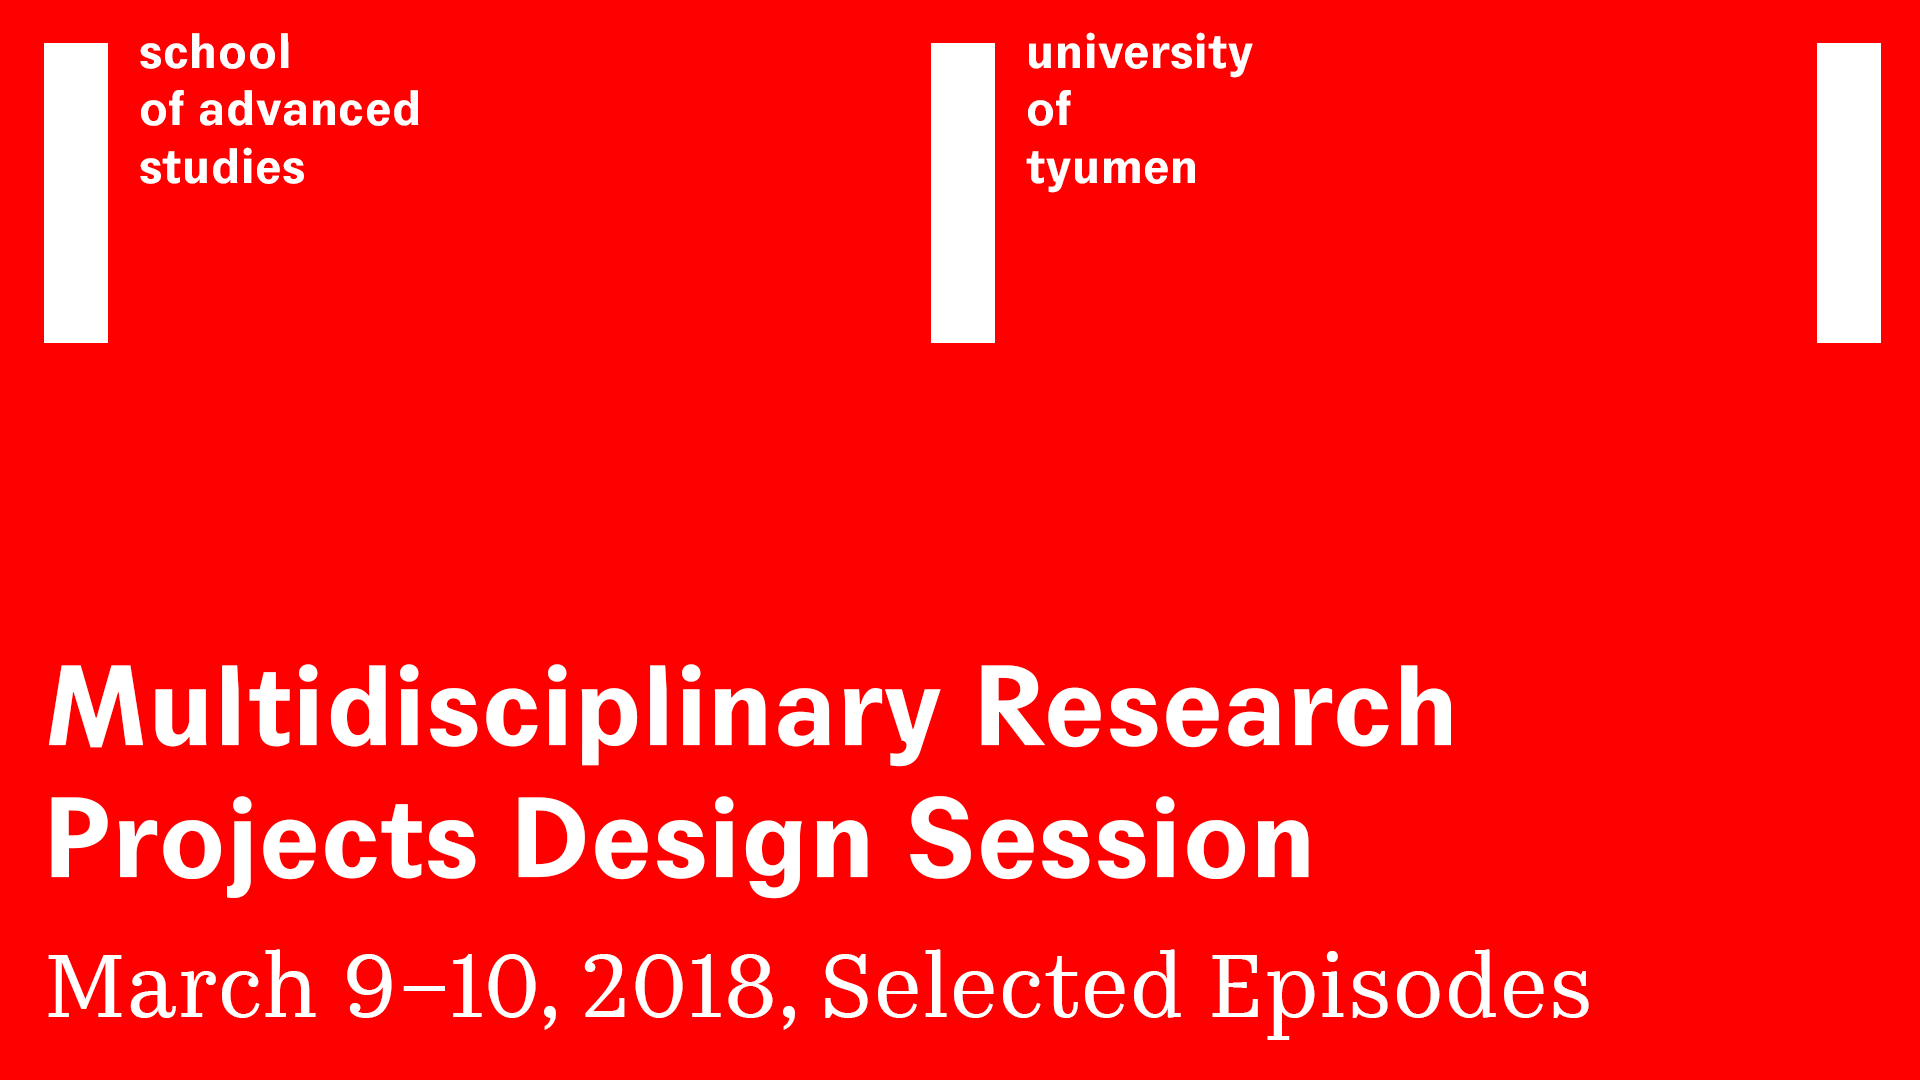 Select Discussion Episodes from Multidisciplinary Research Projects Design Session